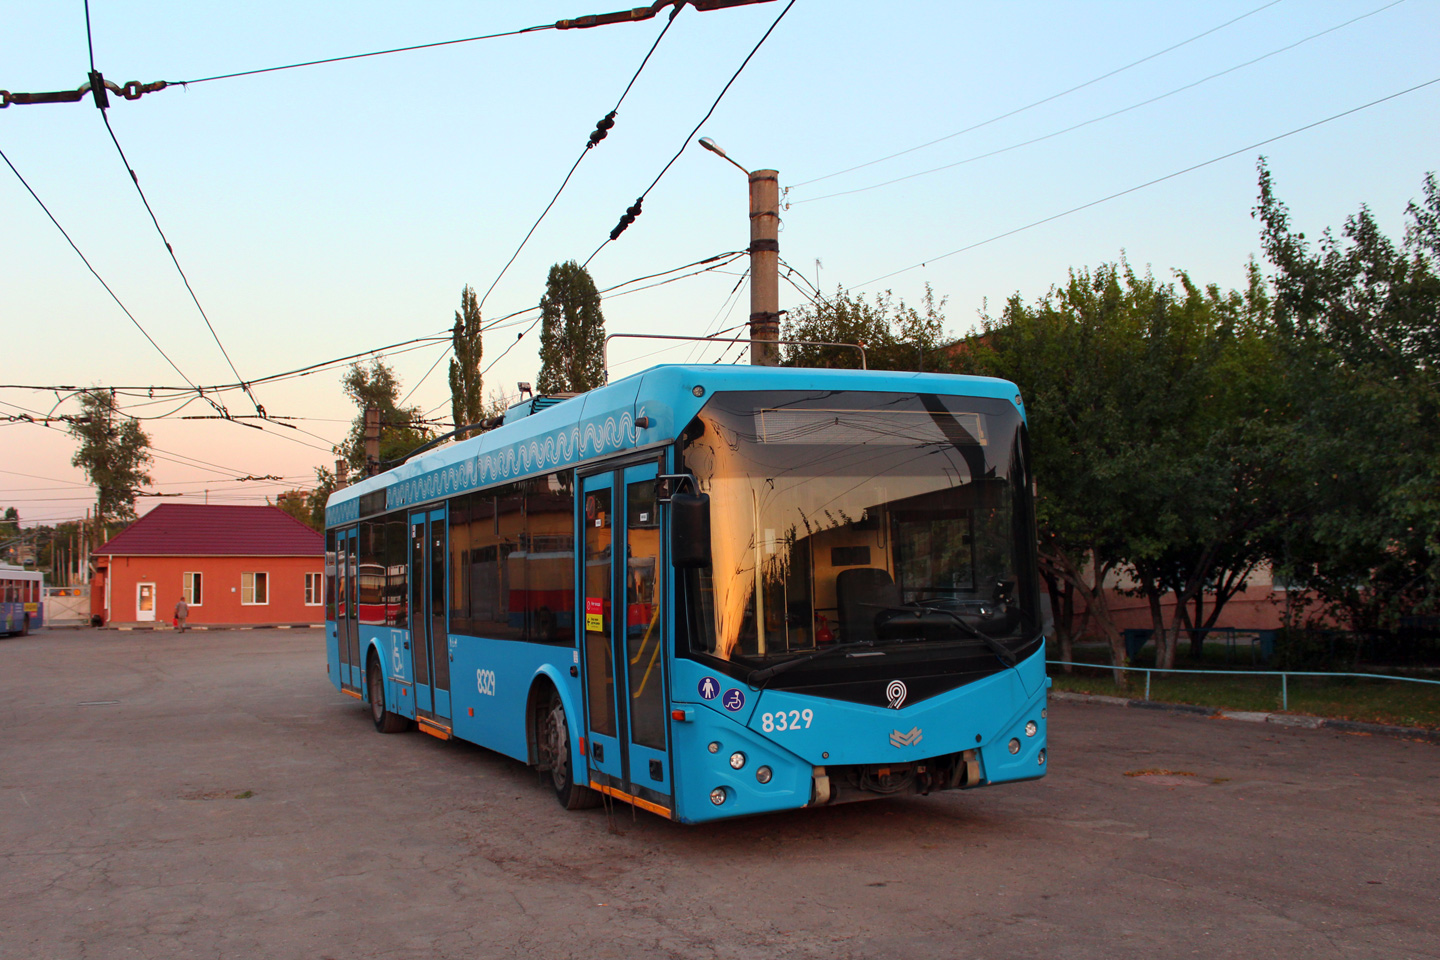 Saratov, BKM 321 N°. 8329; Saratov — Delivery of trolleybuses from Moscow — 2020